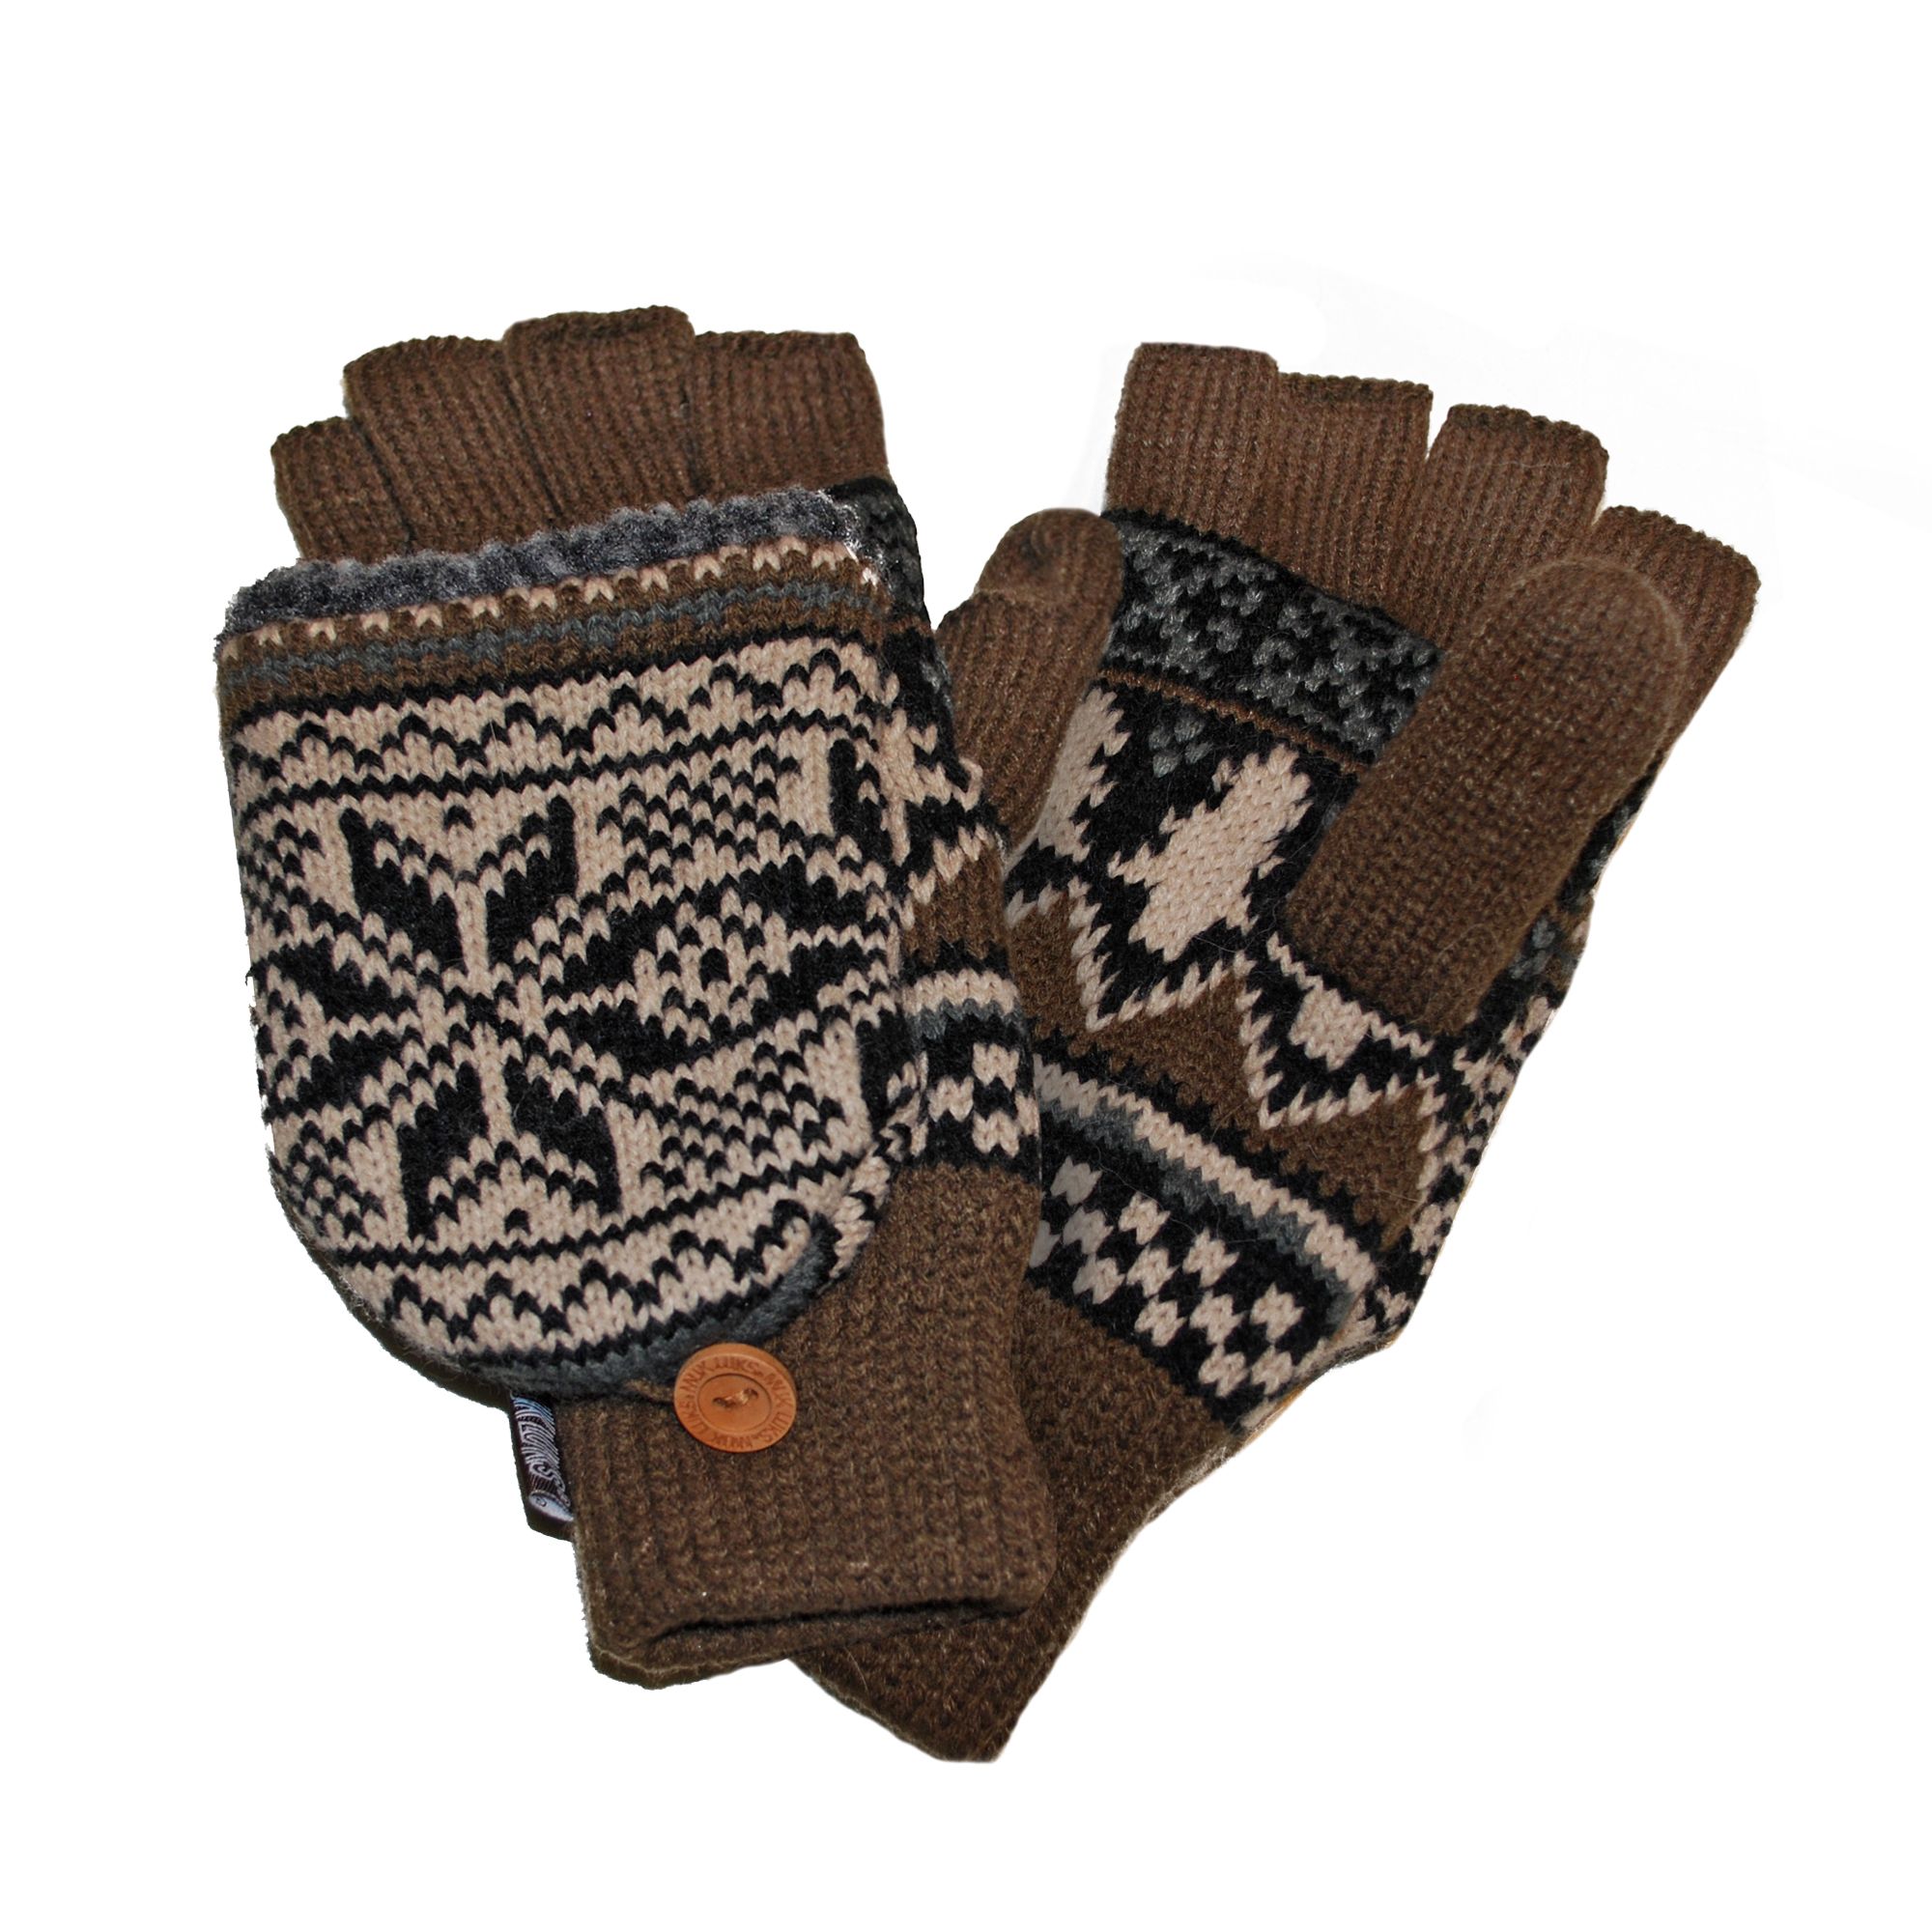 Traditional Nordic Flip Glove with Sherpa Lining - Neutral